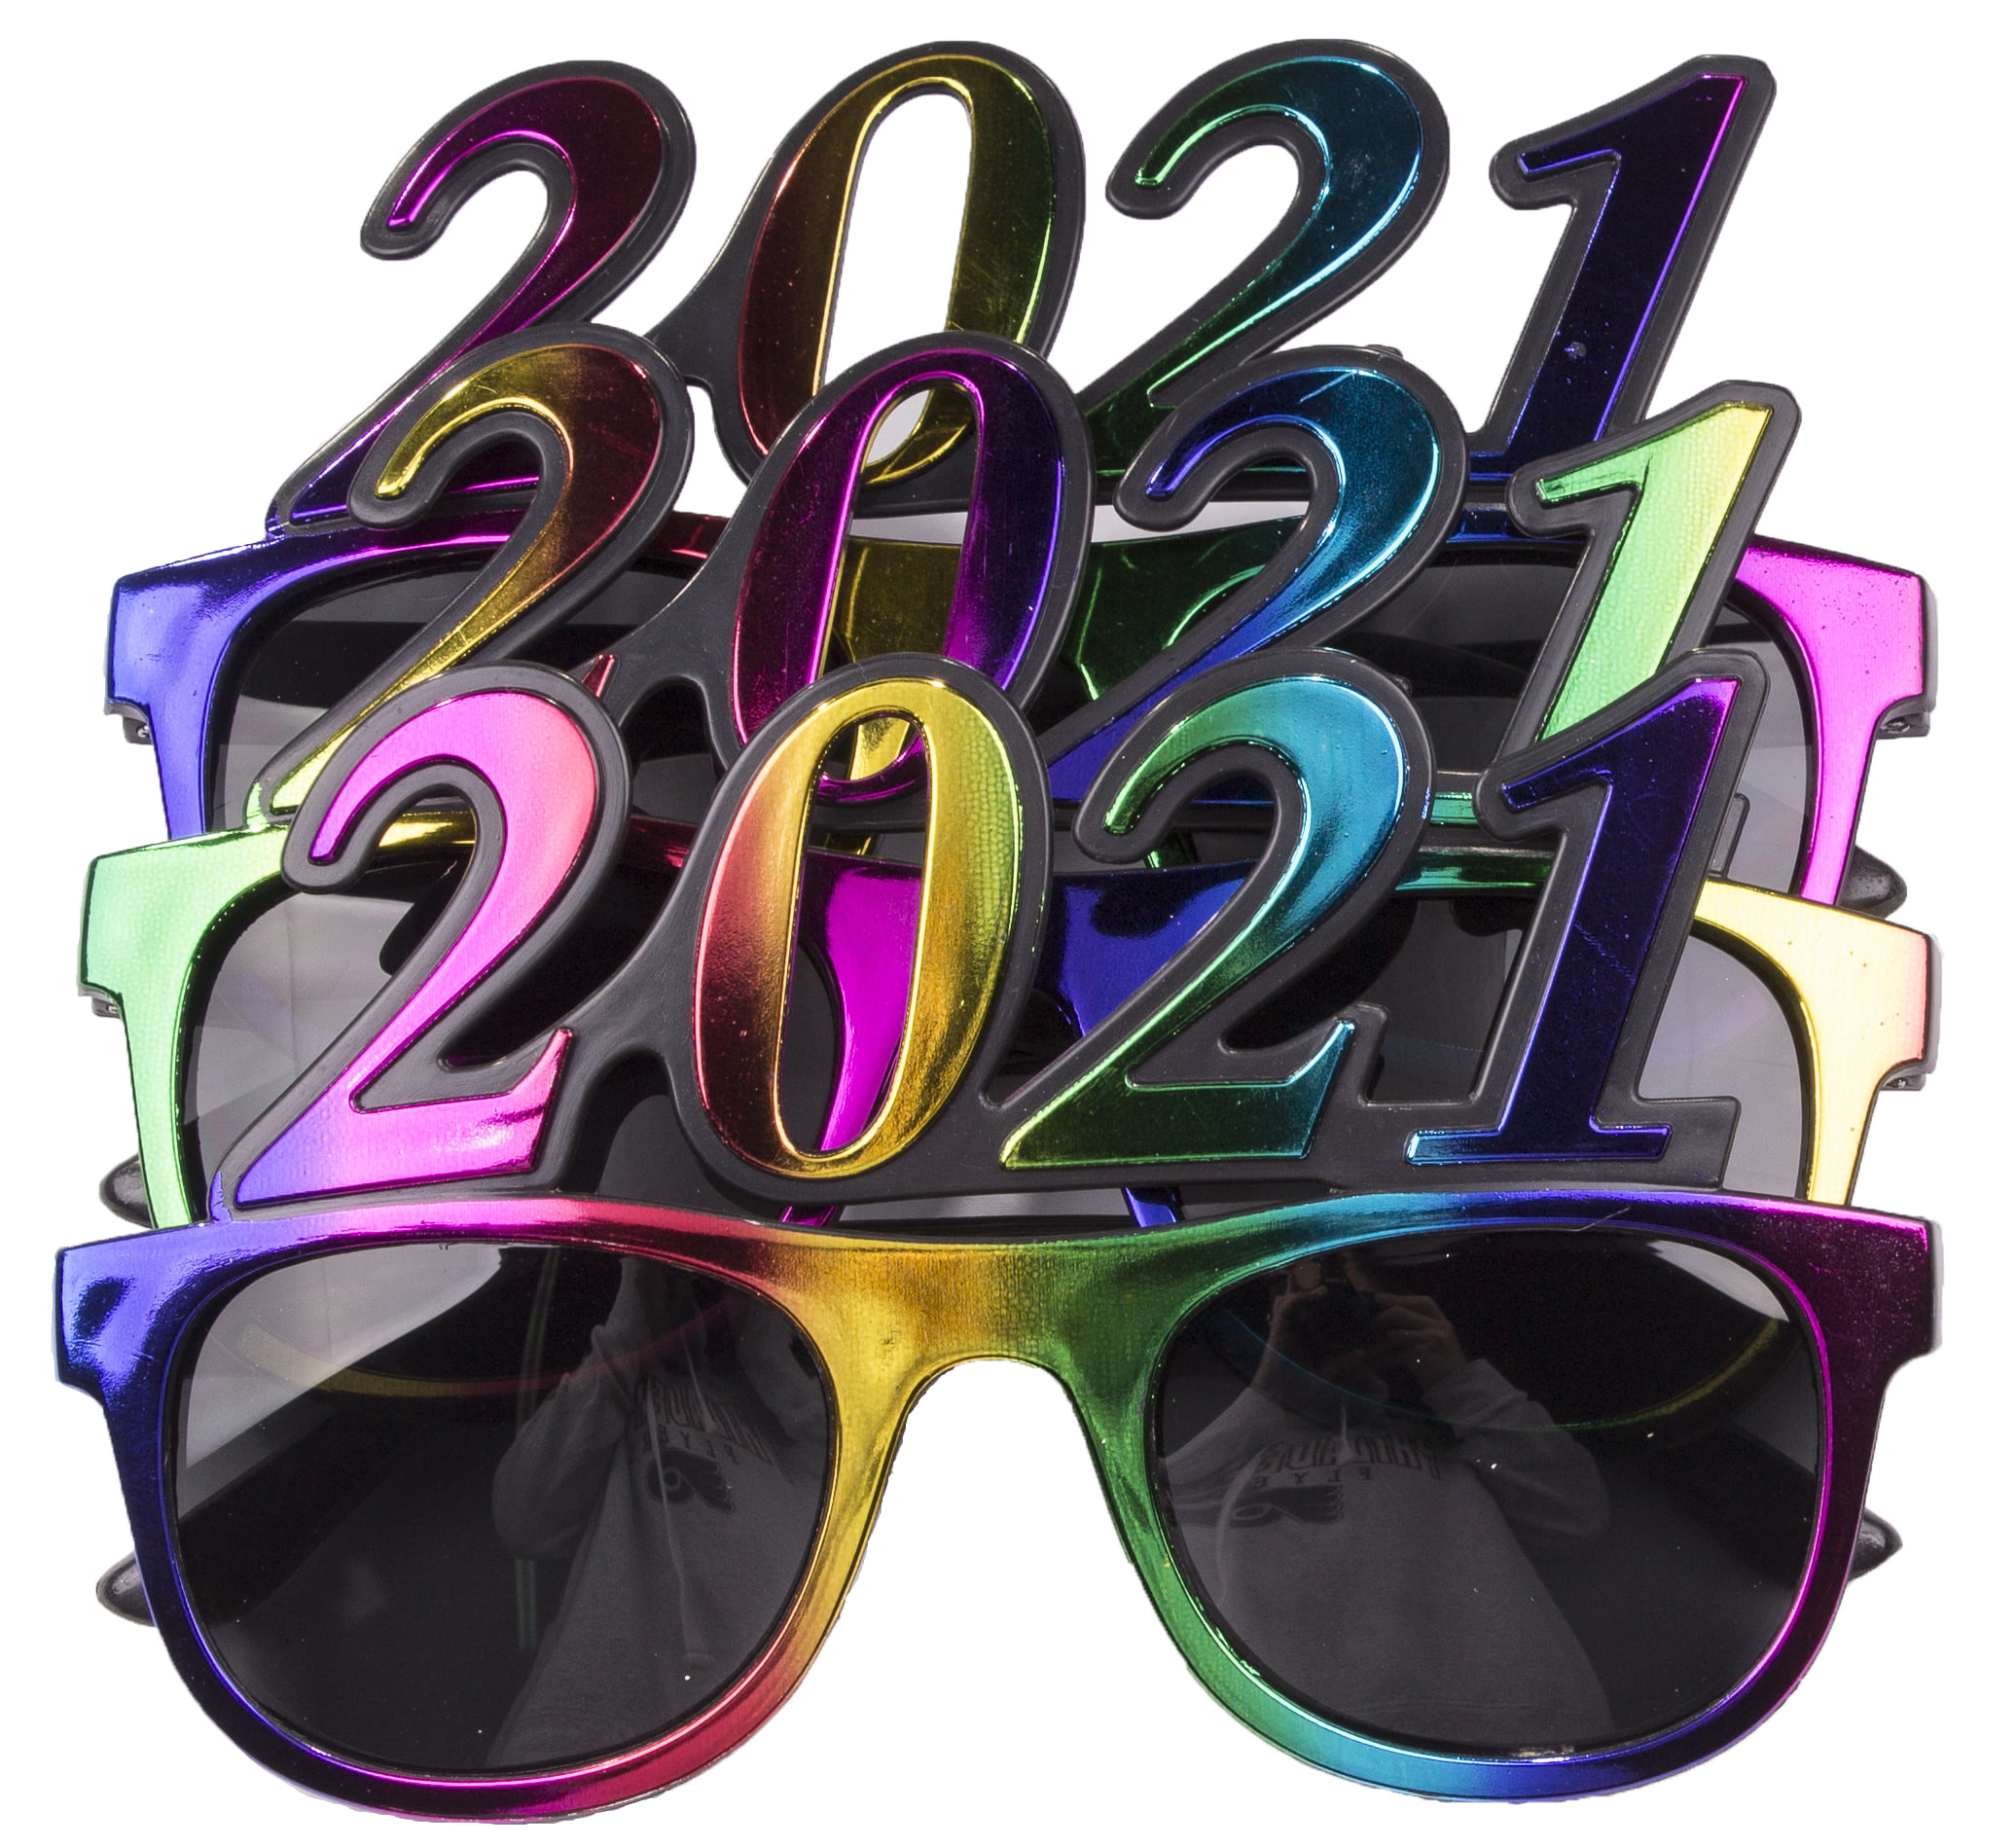 Multi Metallic 3 Pack Of 2021 New Years Eve Party Glasses 